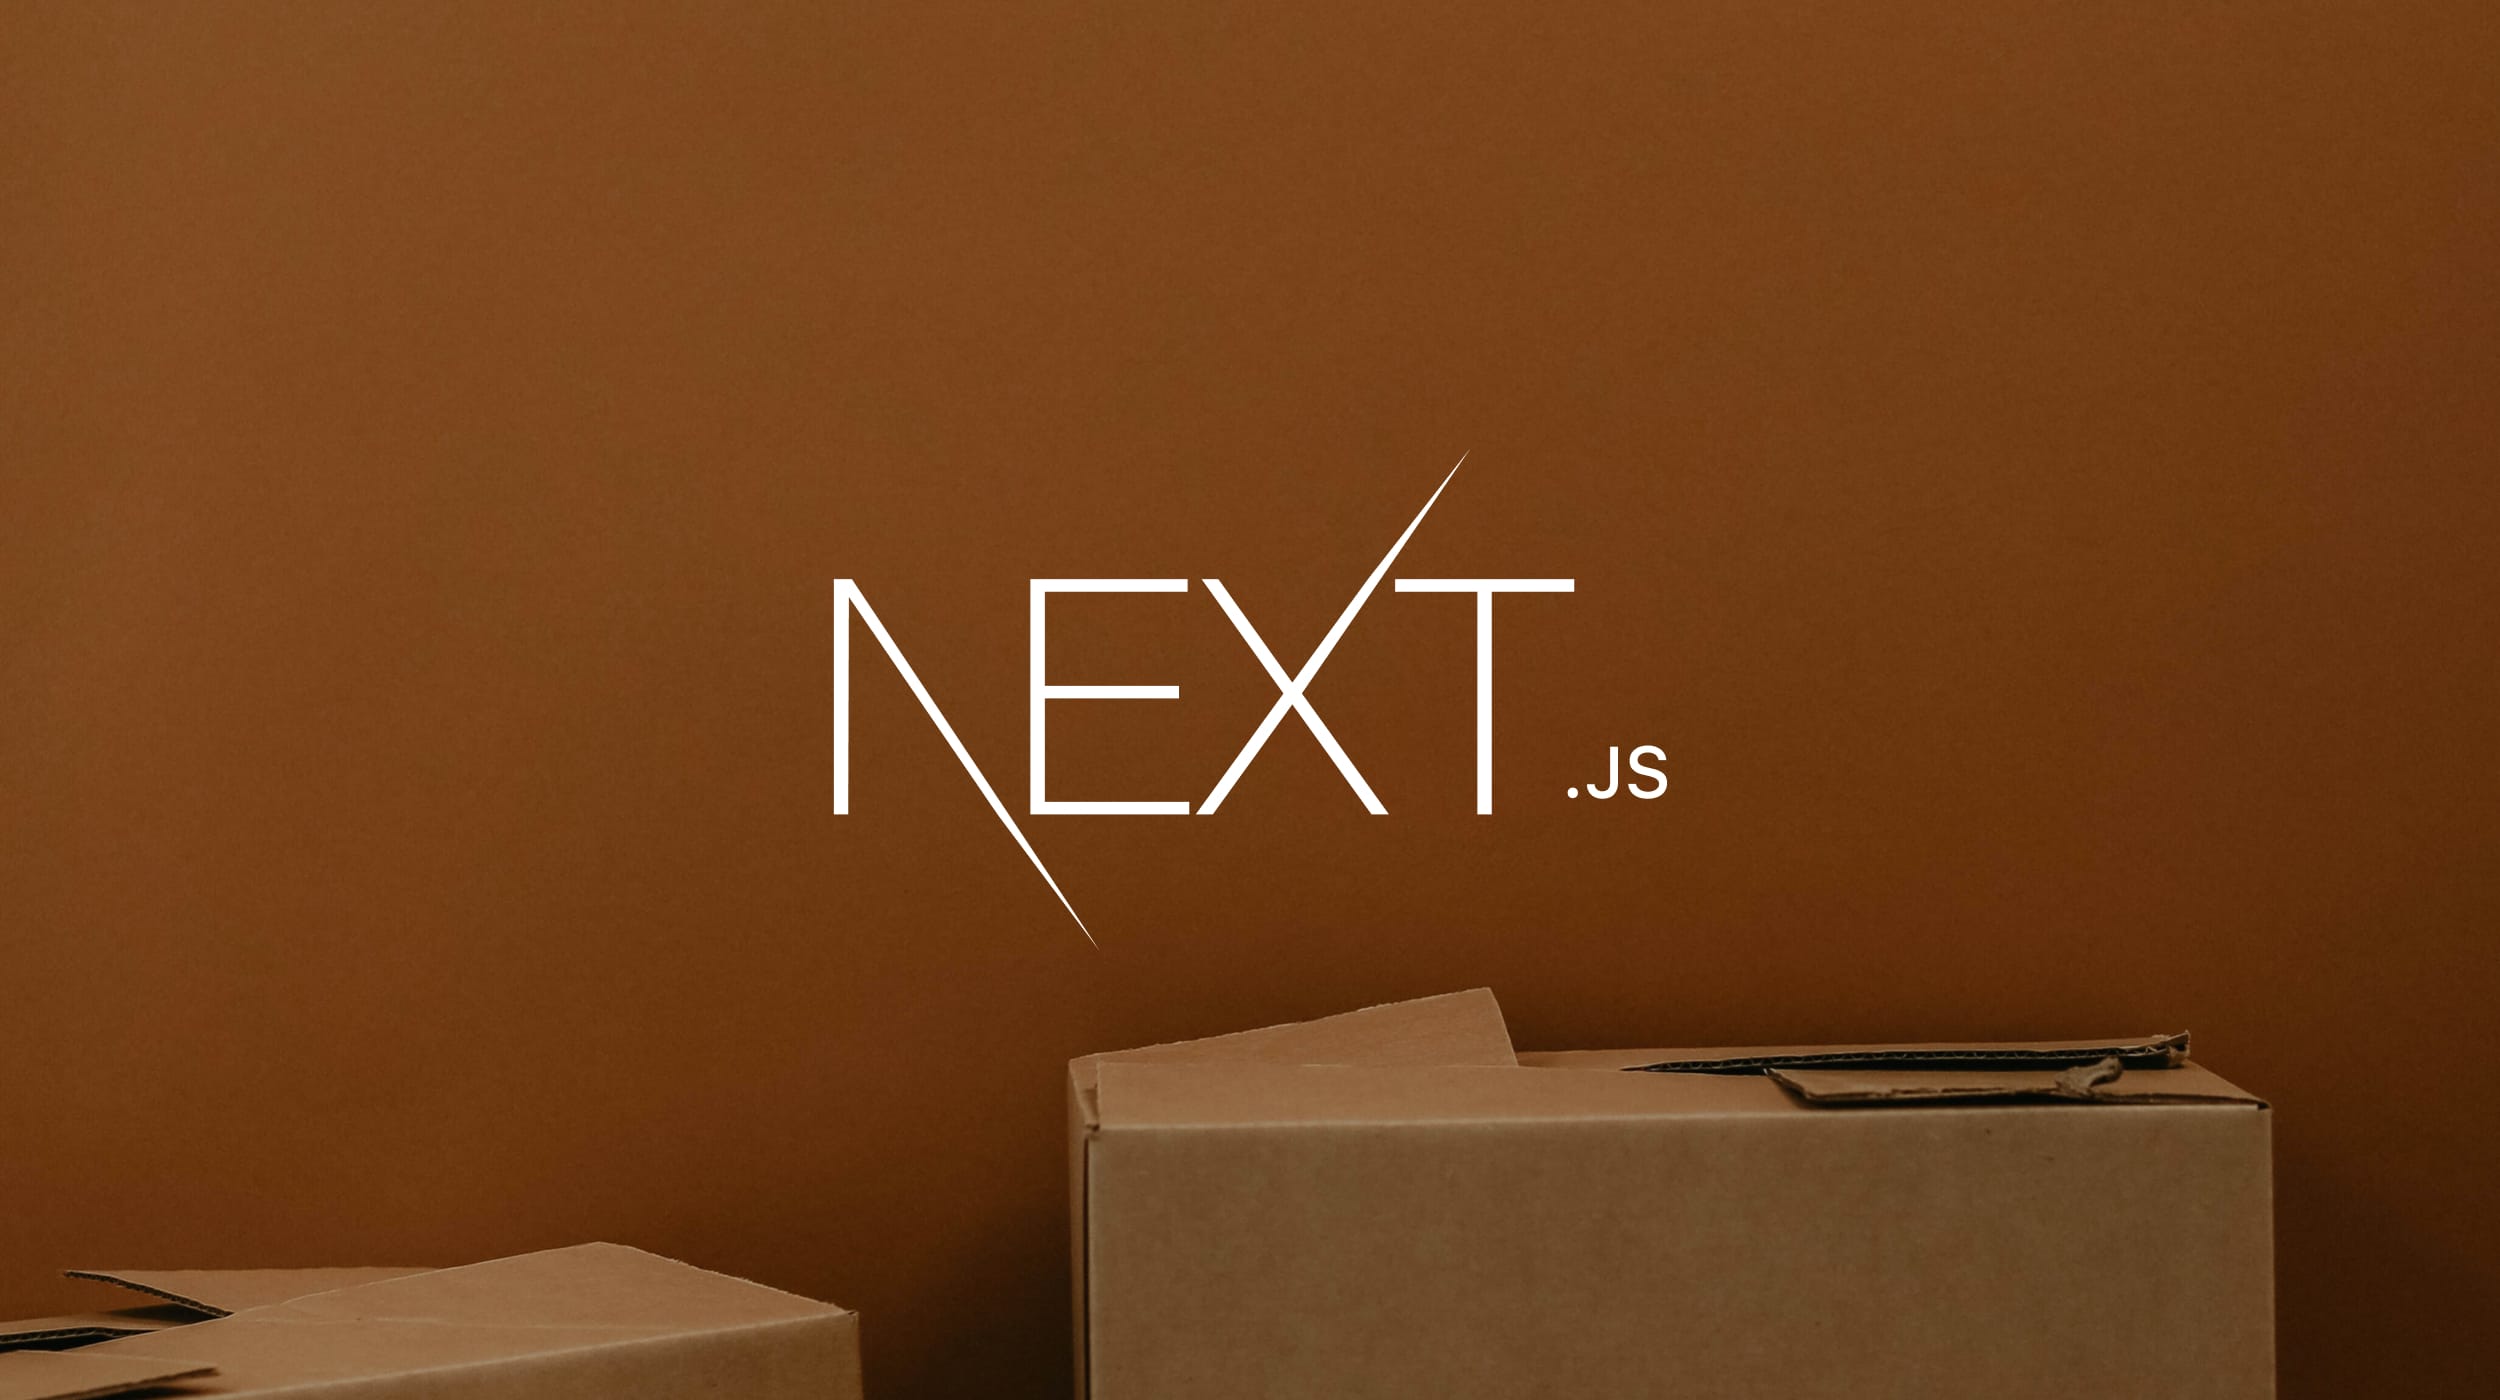 A stack of boxes on a sepia background with the Next.js logo overlayed